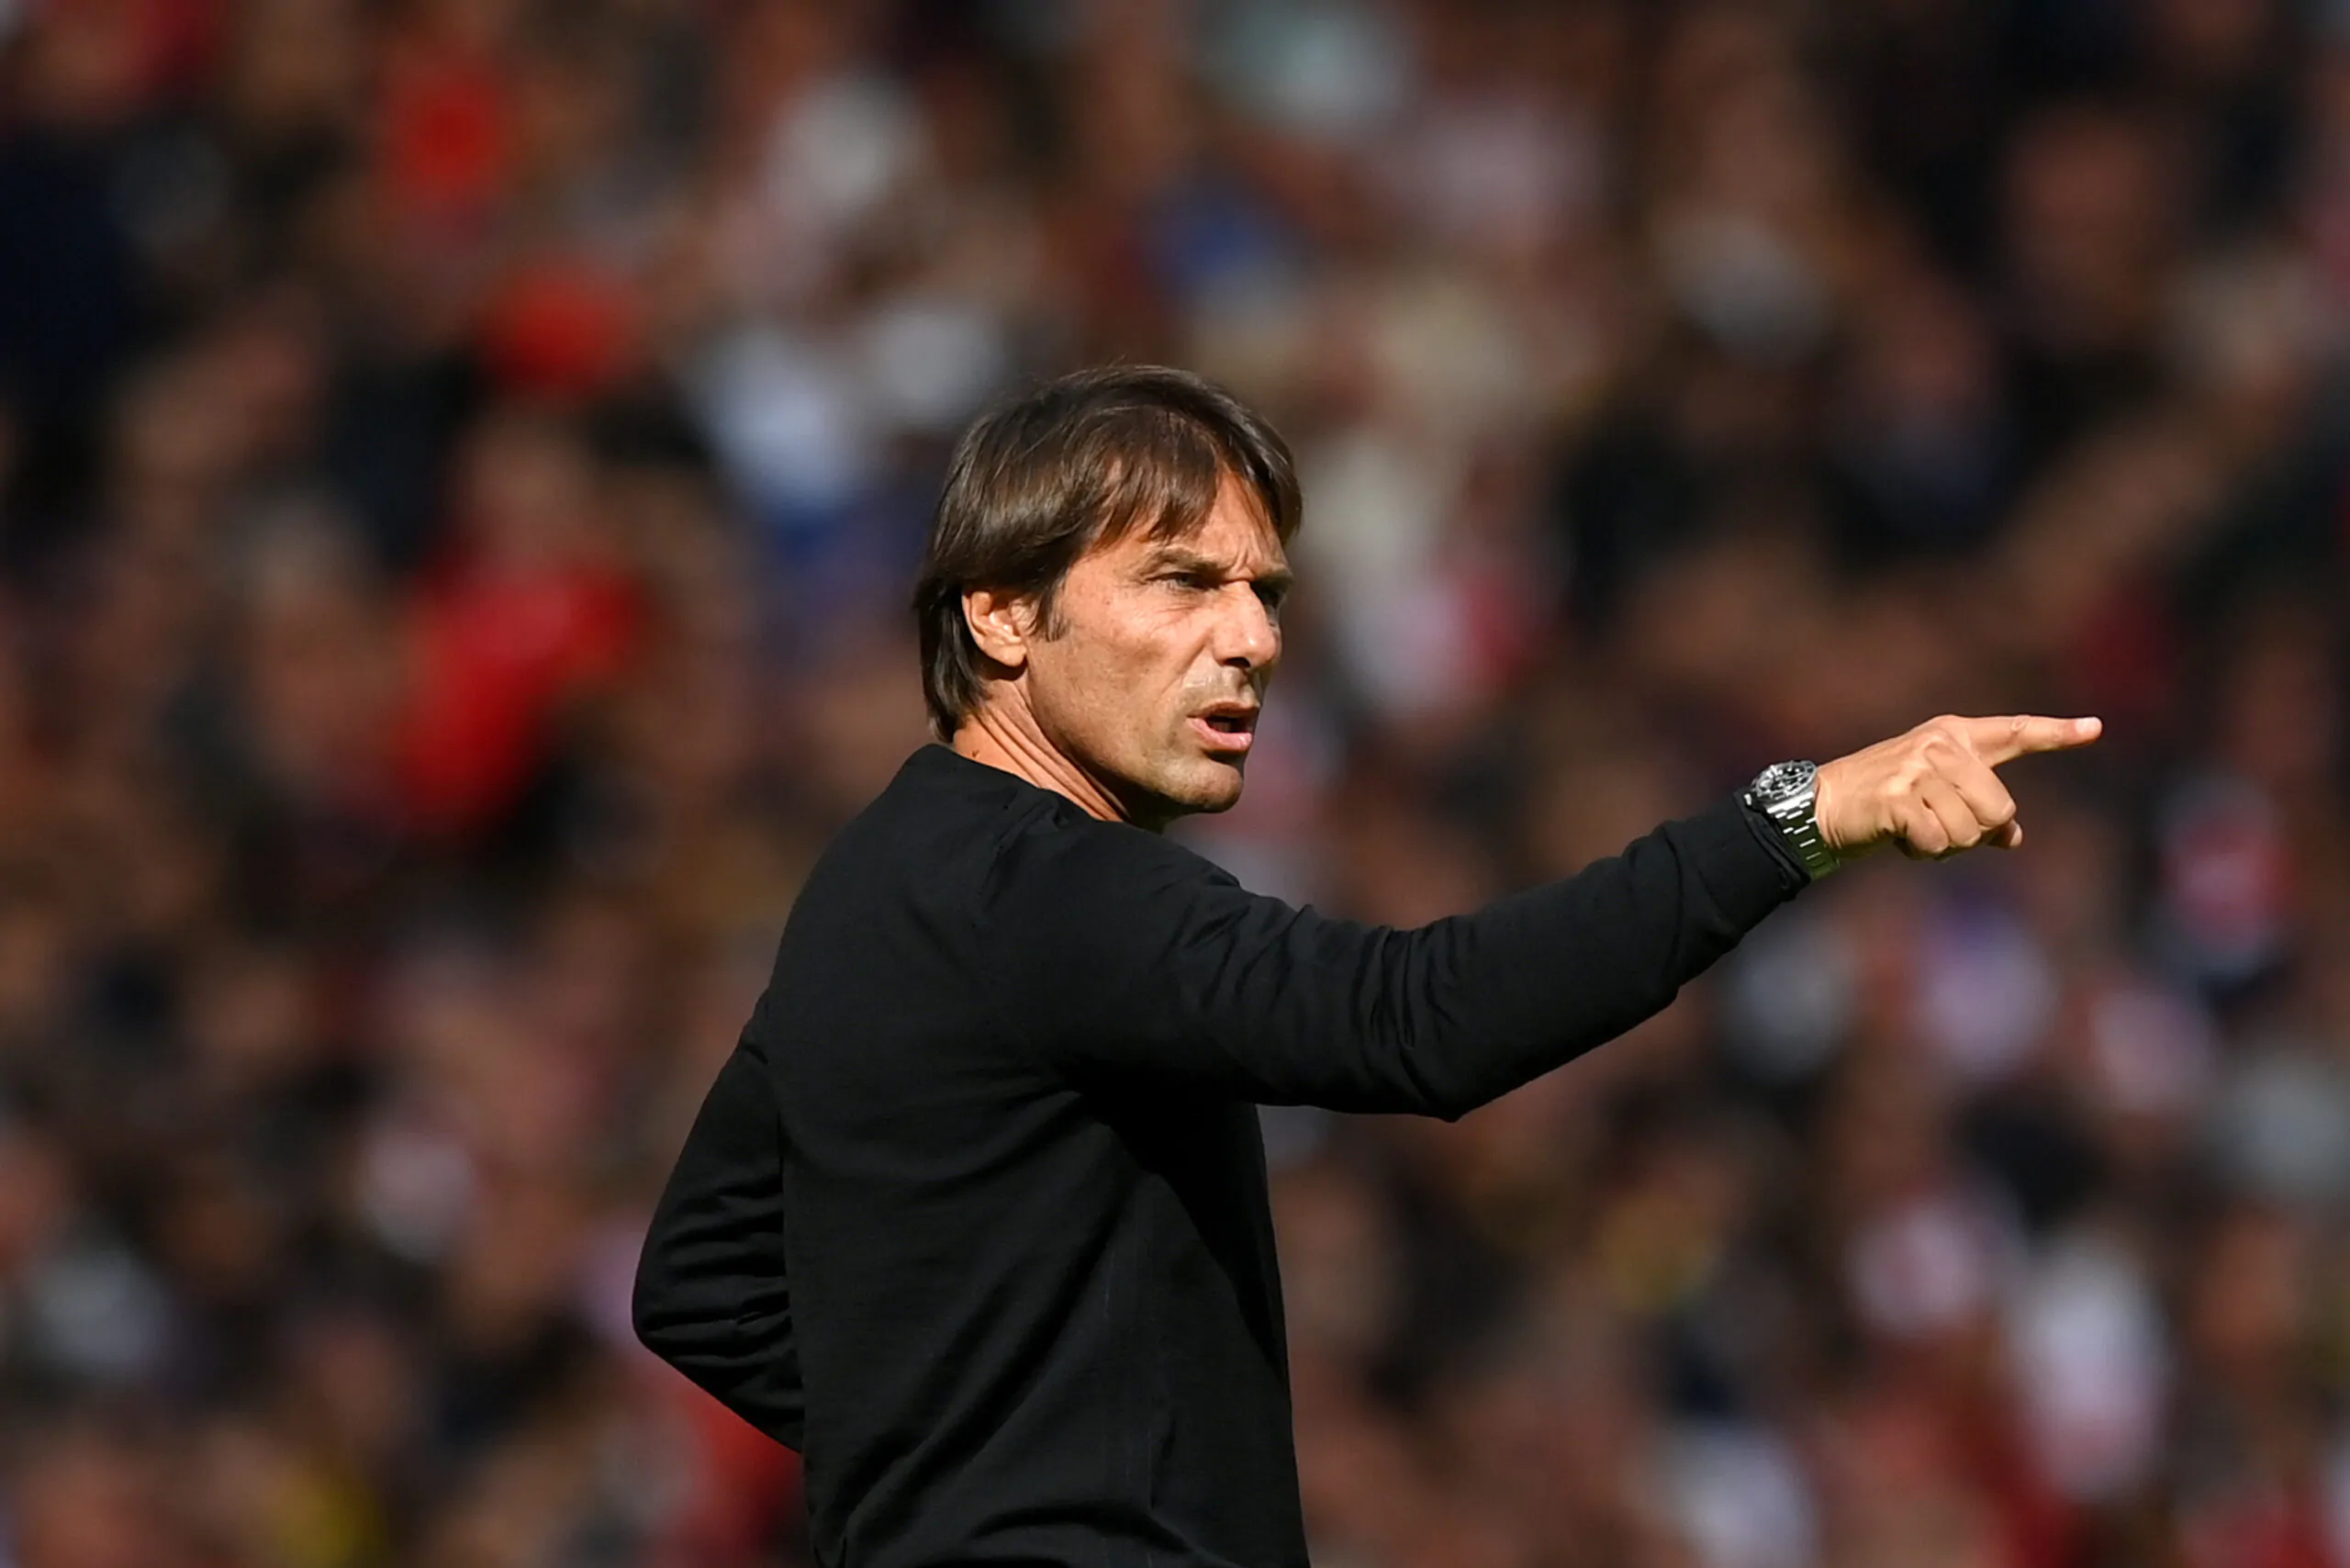 Antonio Conte has prioritized Serie A in his comeback on the bench following a sabbatical but seriously risks not seeing his wish granted.